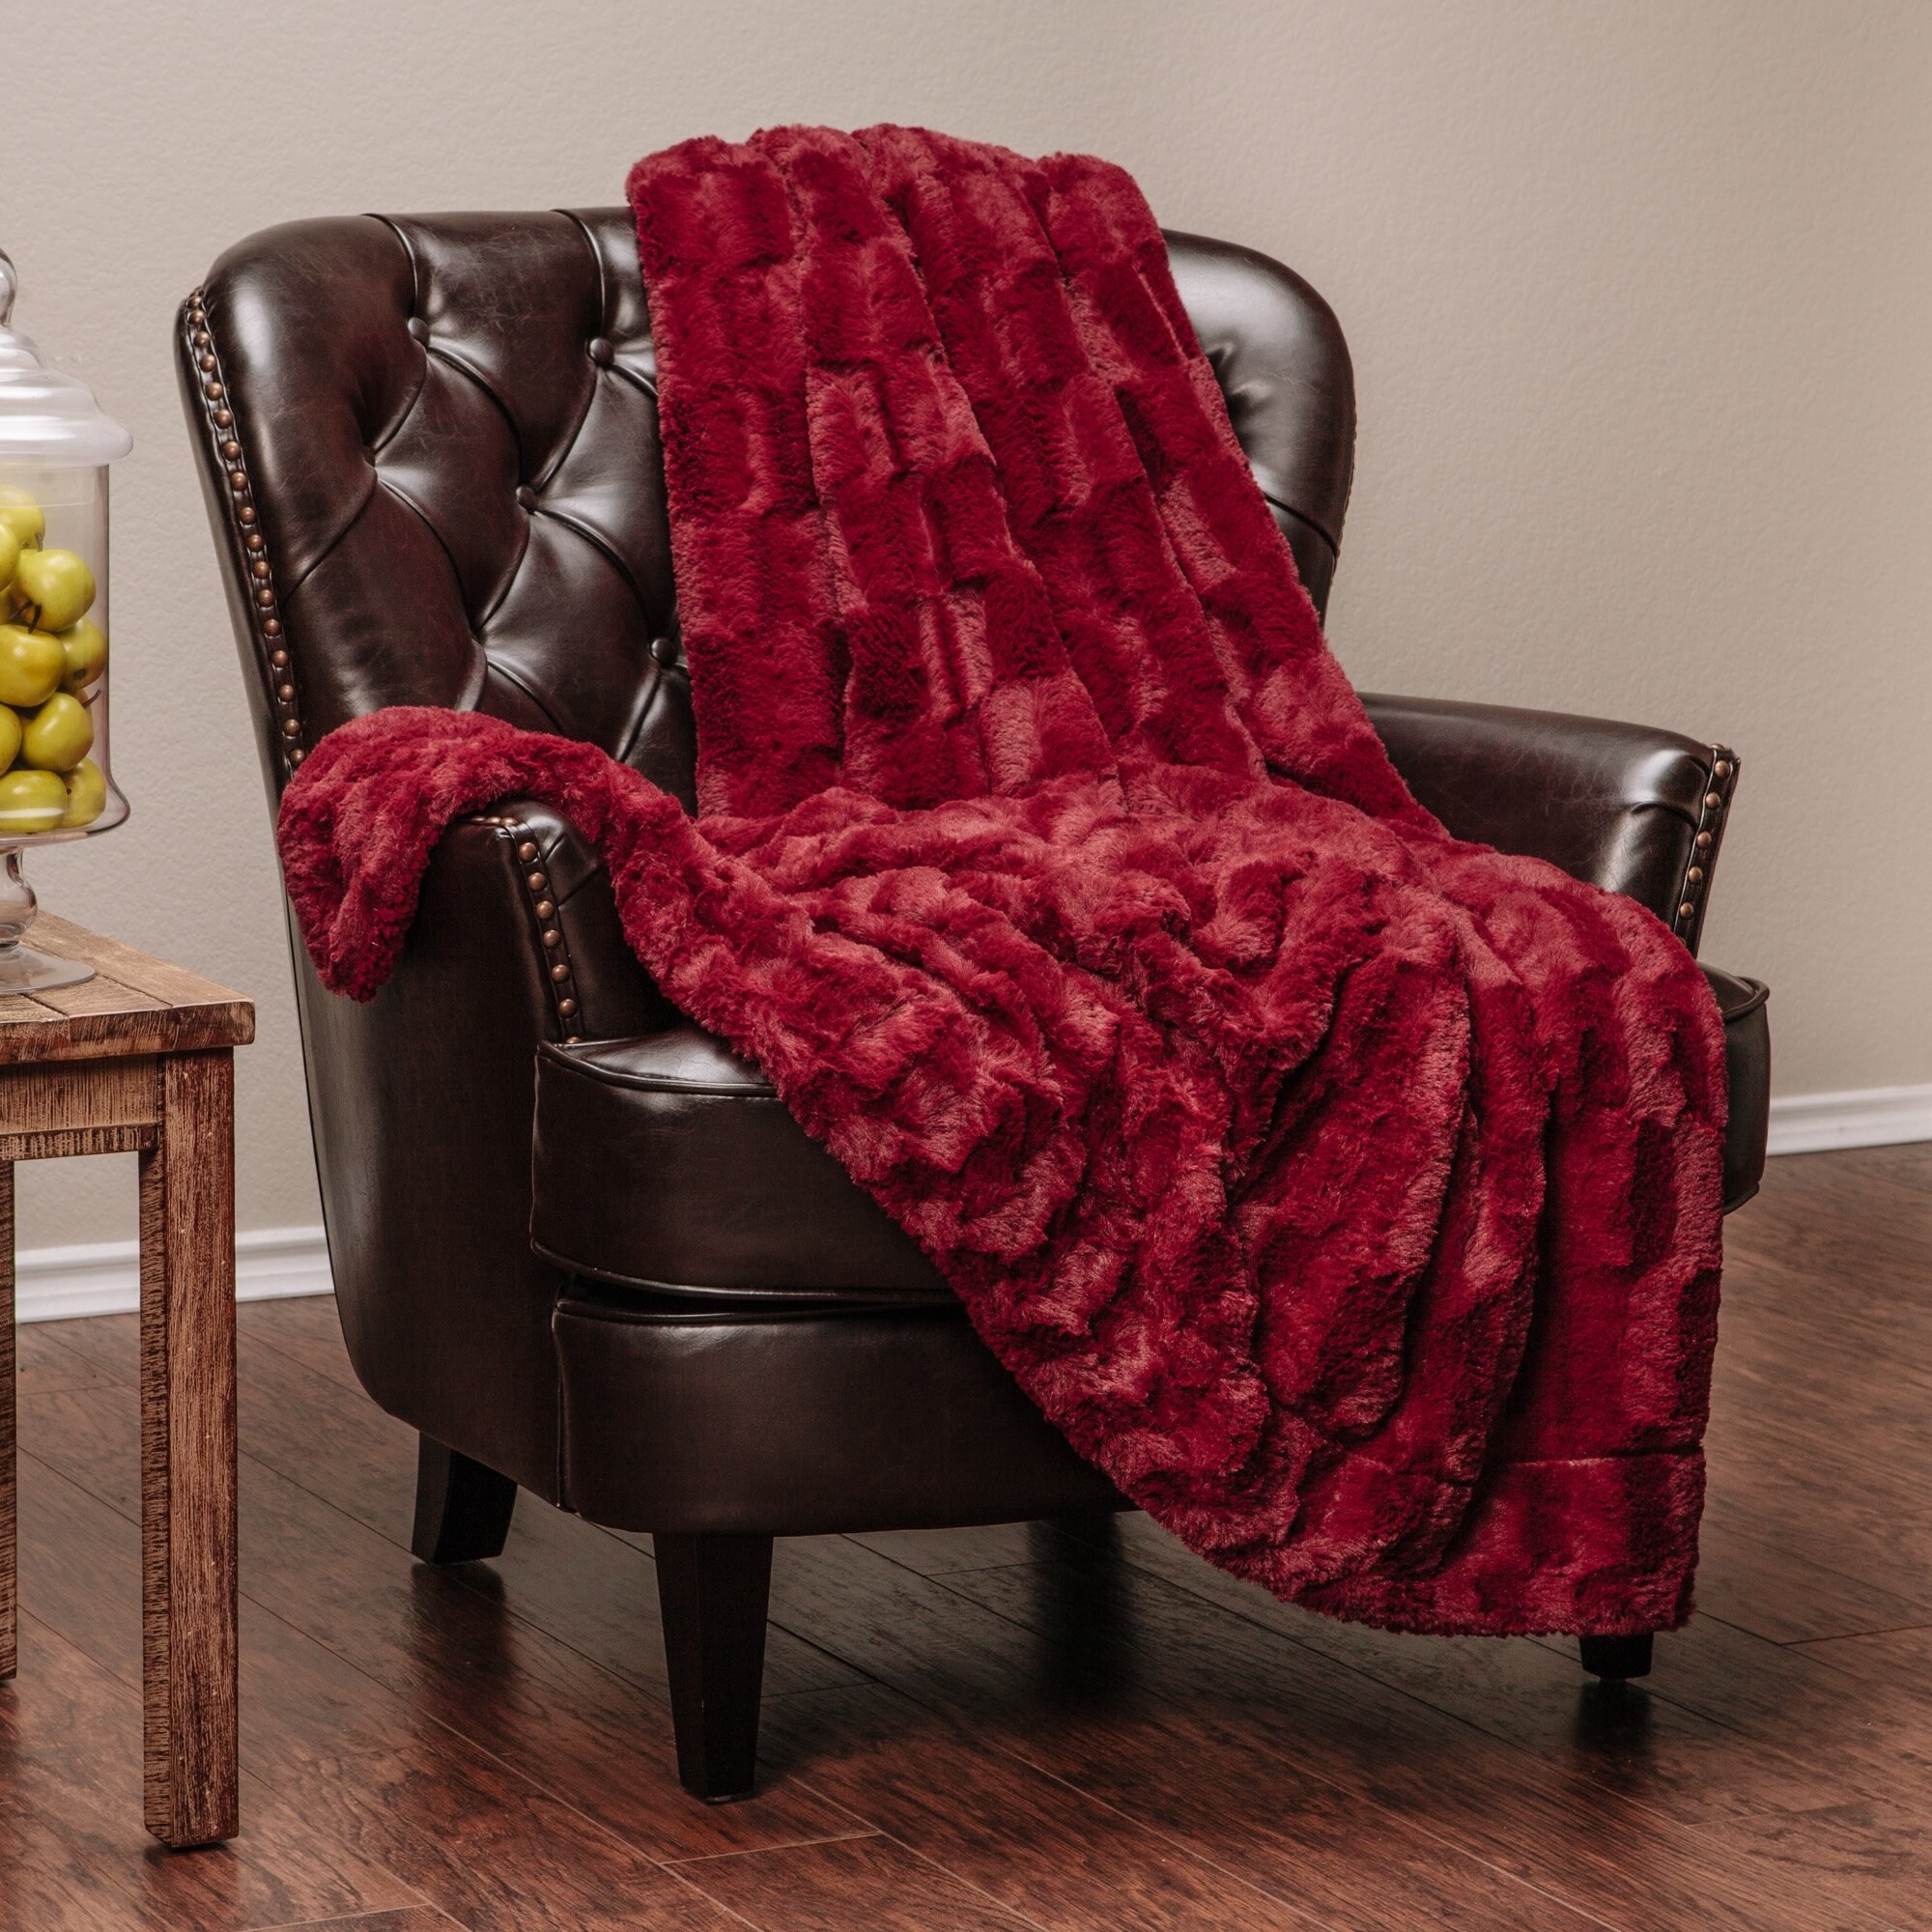 Maroon faux fur throw on leather sitting chair